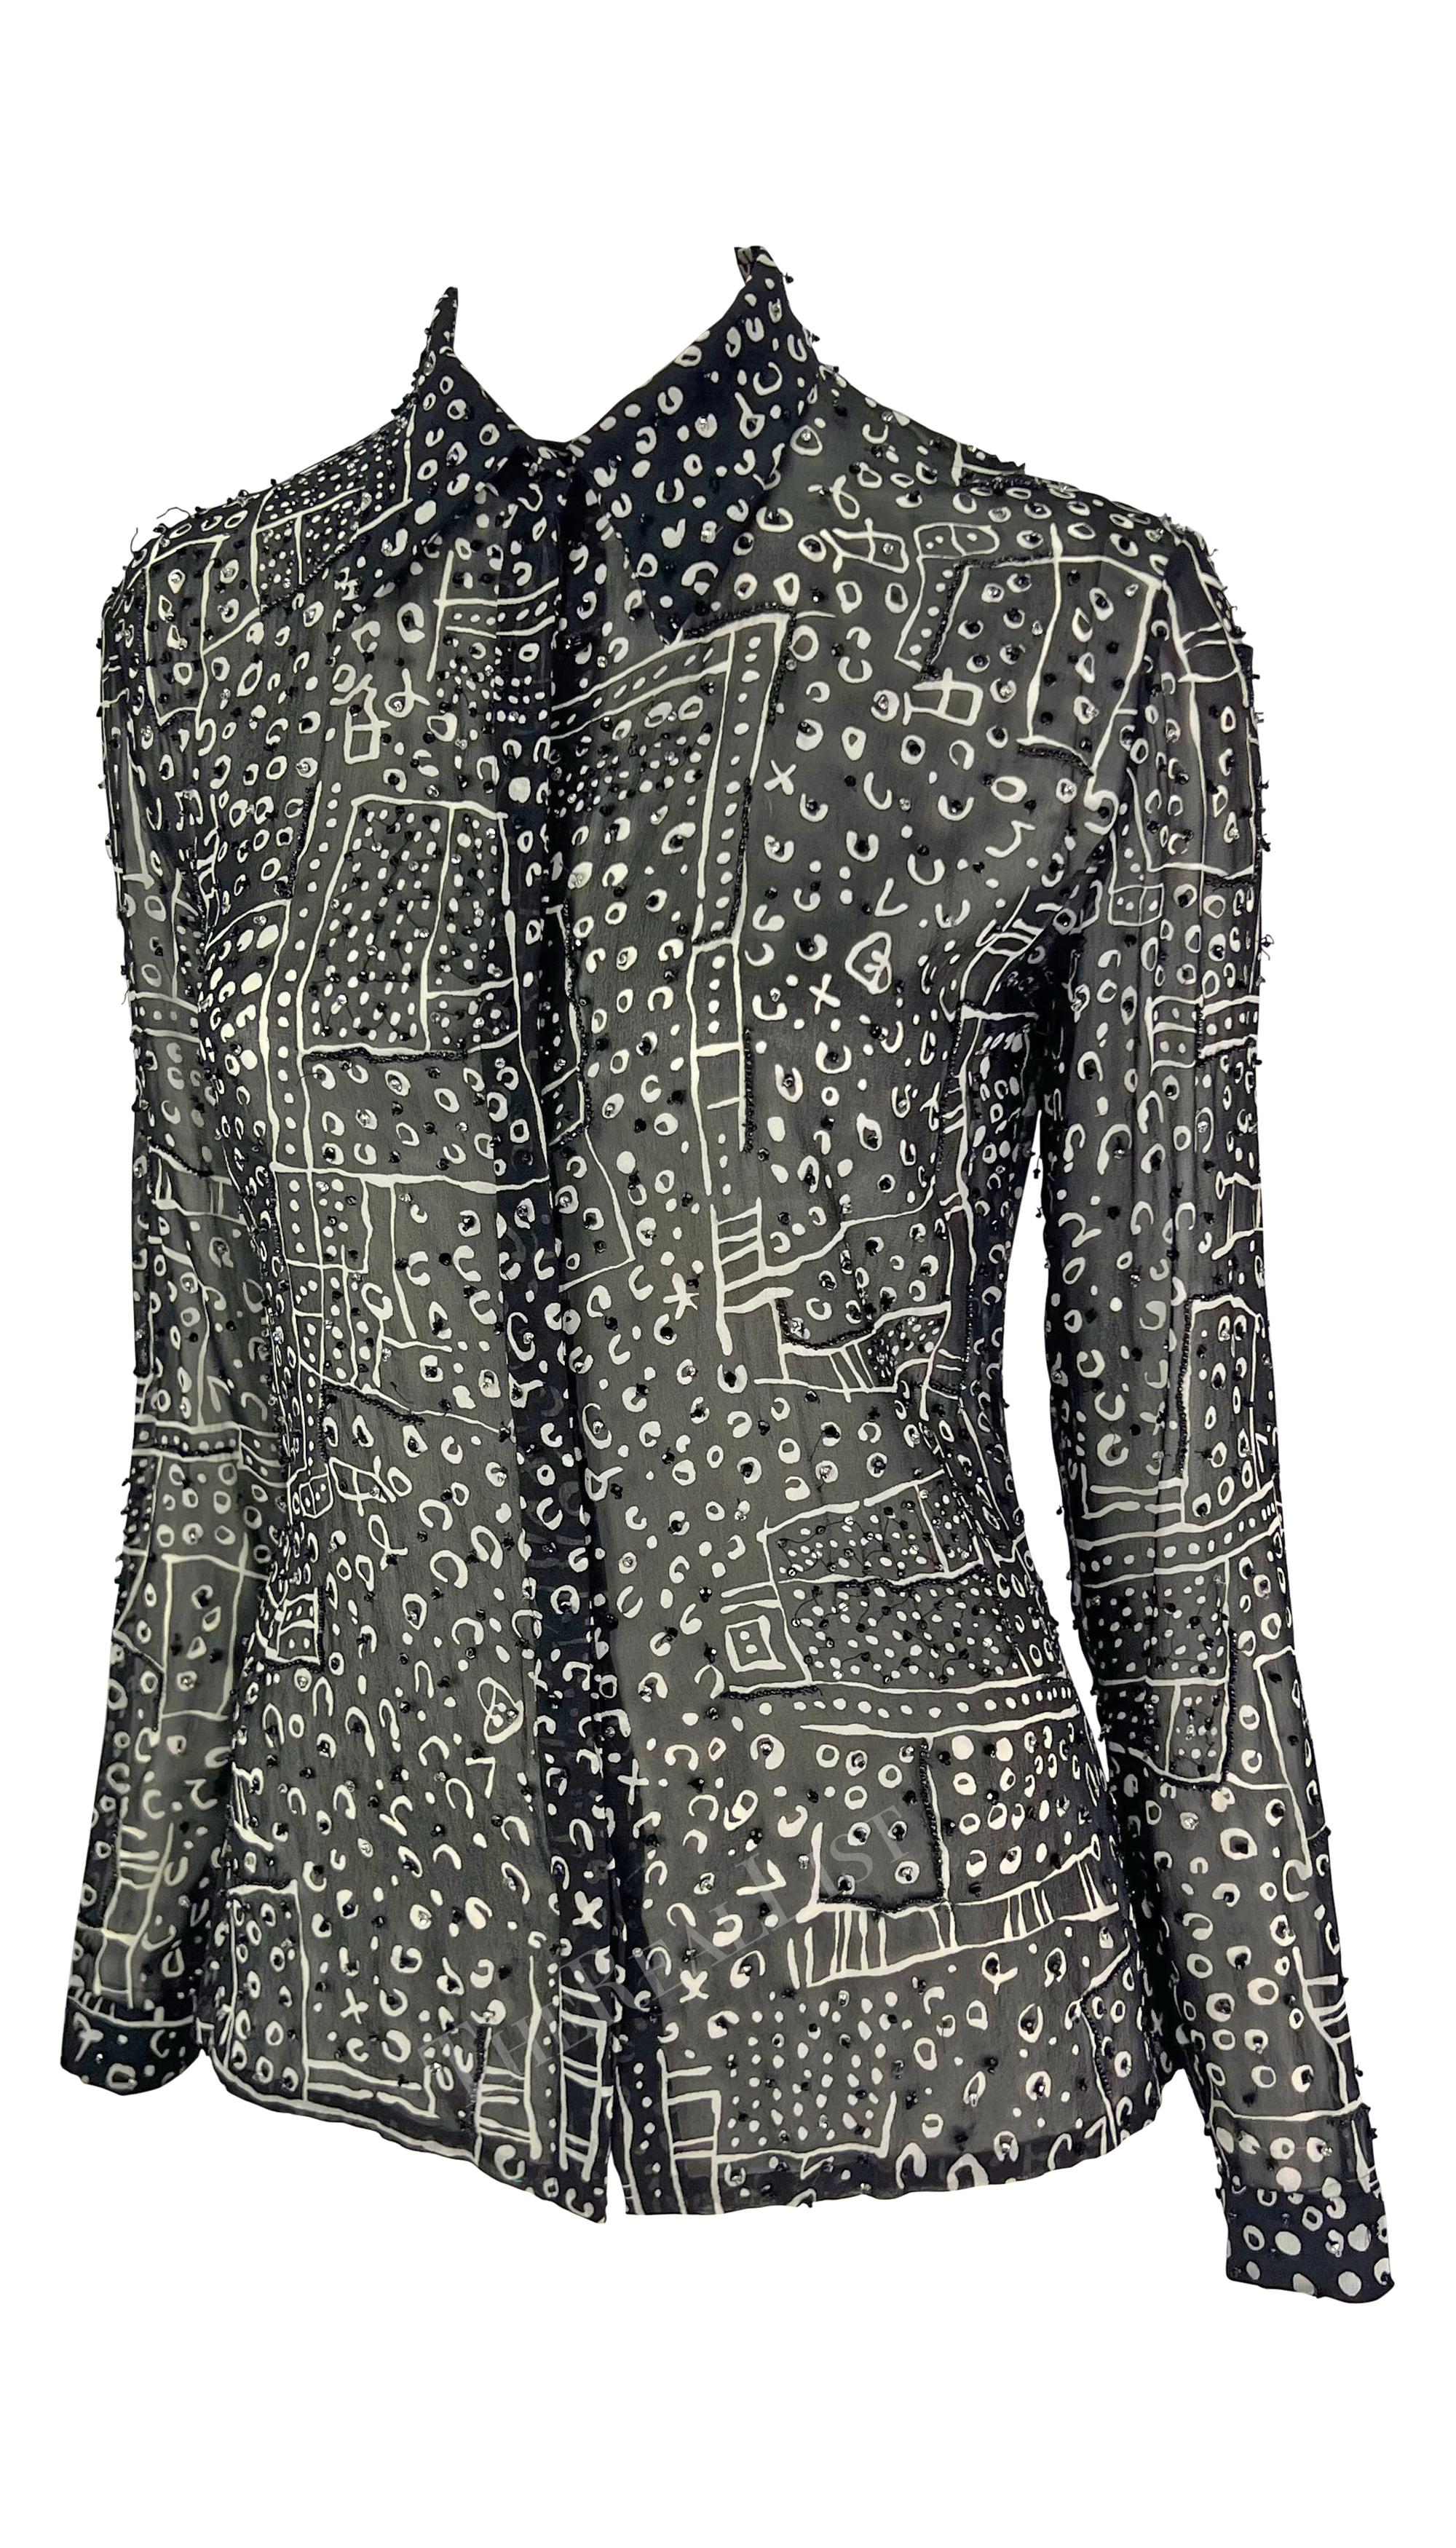 Women's 1990s Atelier Versace Black White Abstract Beaded Collared Shirt For Sale